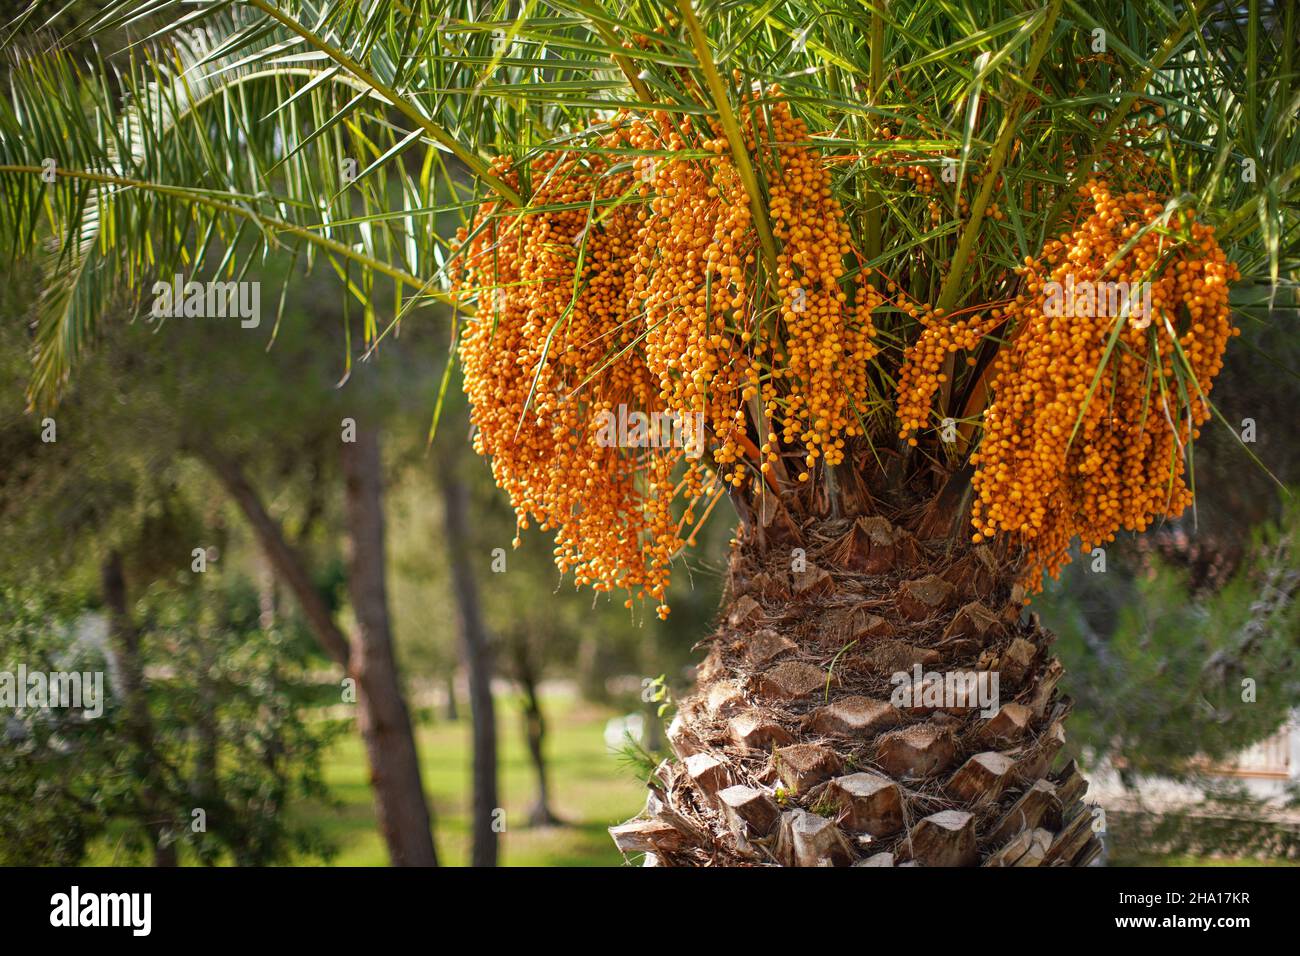 Pindo jelly palm (butia capitata) yellow fruits hanging from a tree Stock Photo